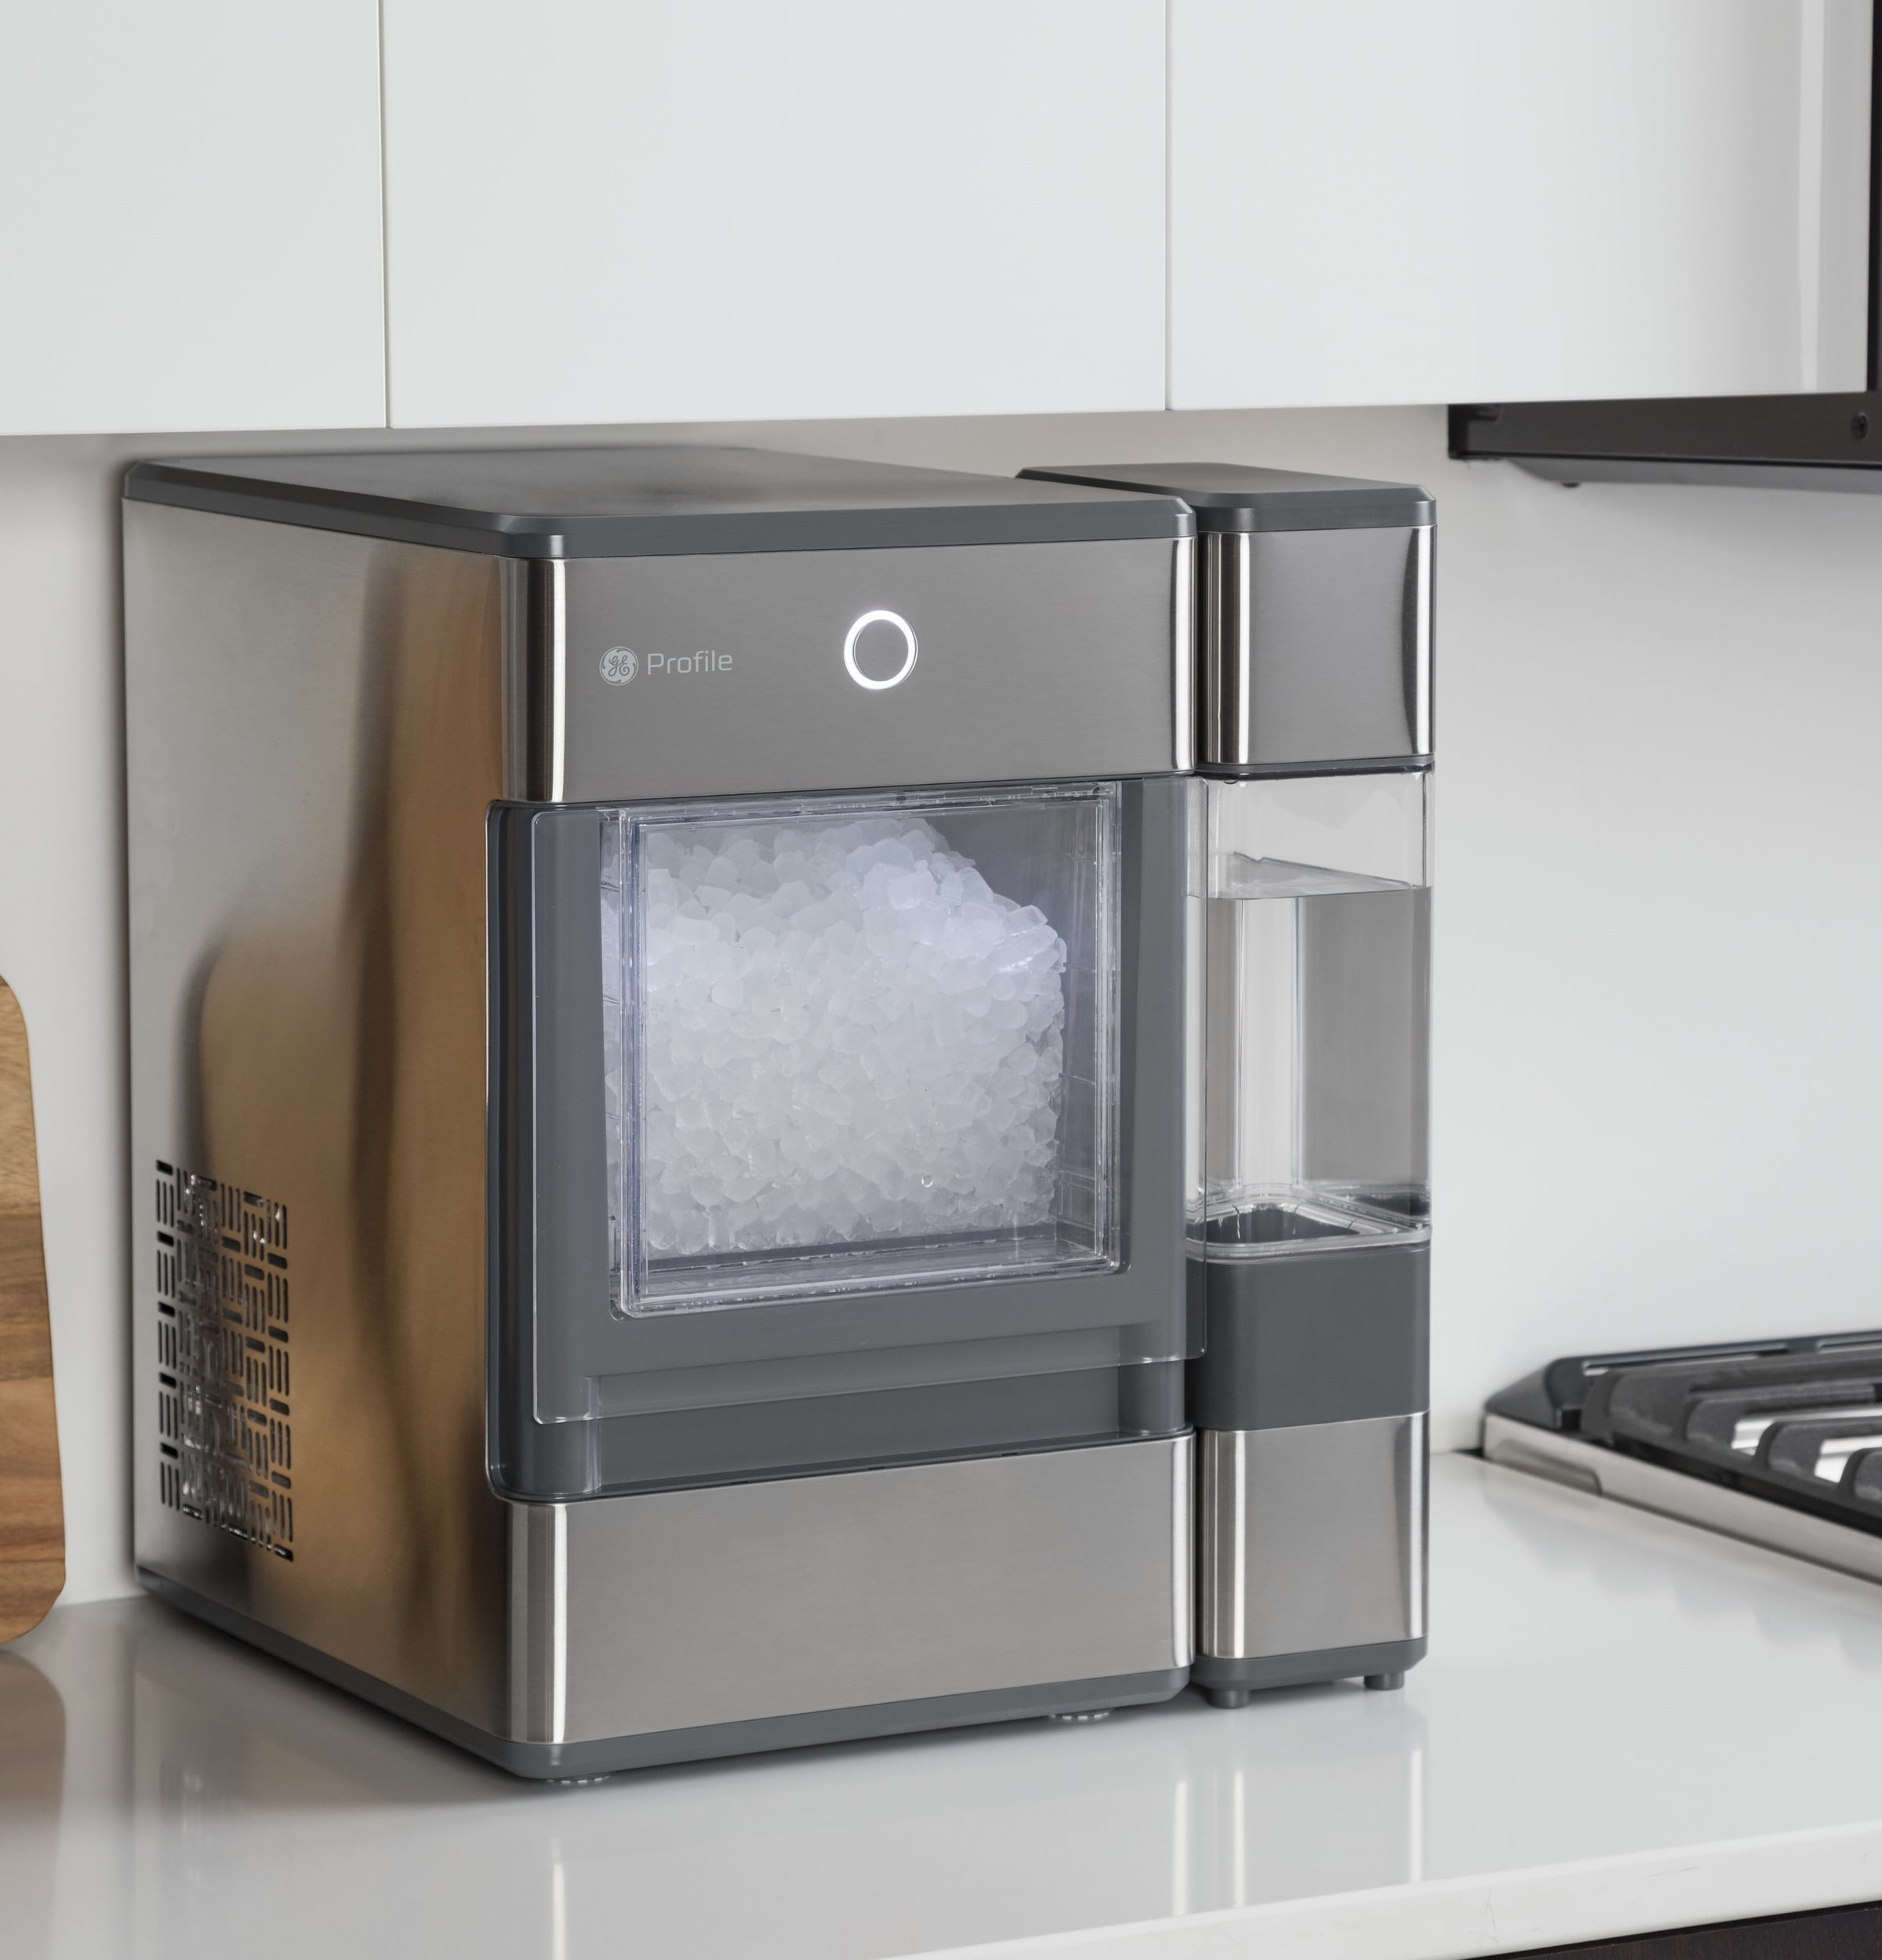 GE Profile™ Opal™ Nugget Ice Maker + Side Tank, Makes up to 24lbs per day, Countertop Icemaker, Stainless Steel - 2